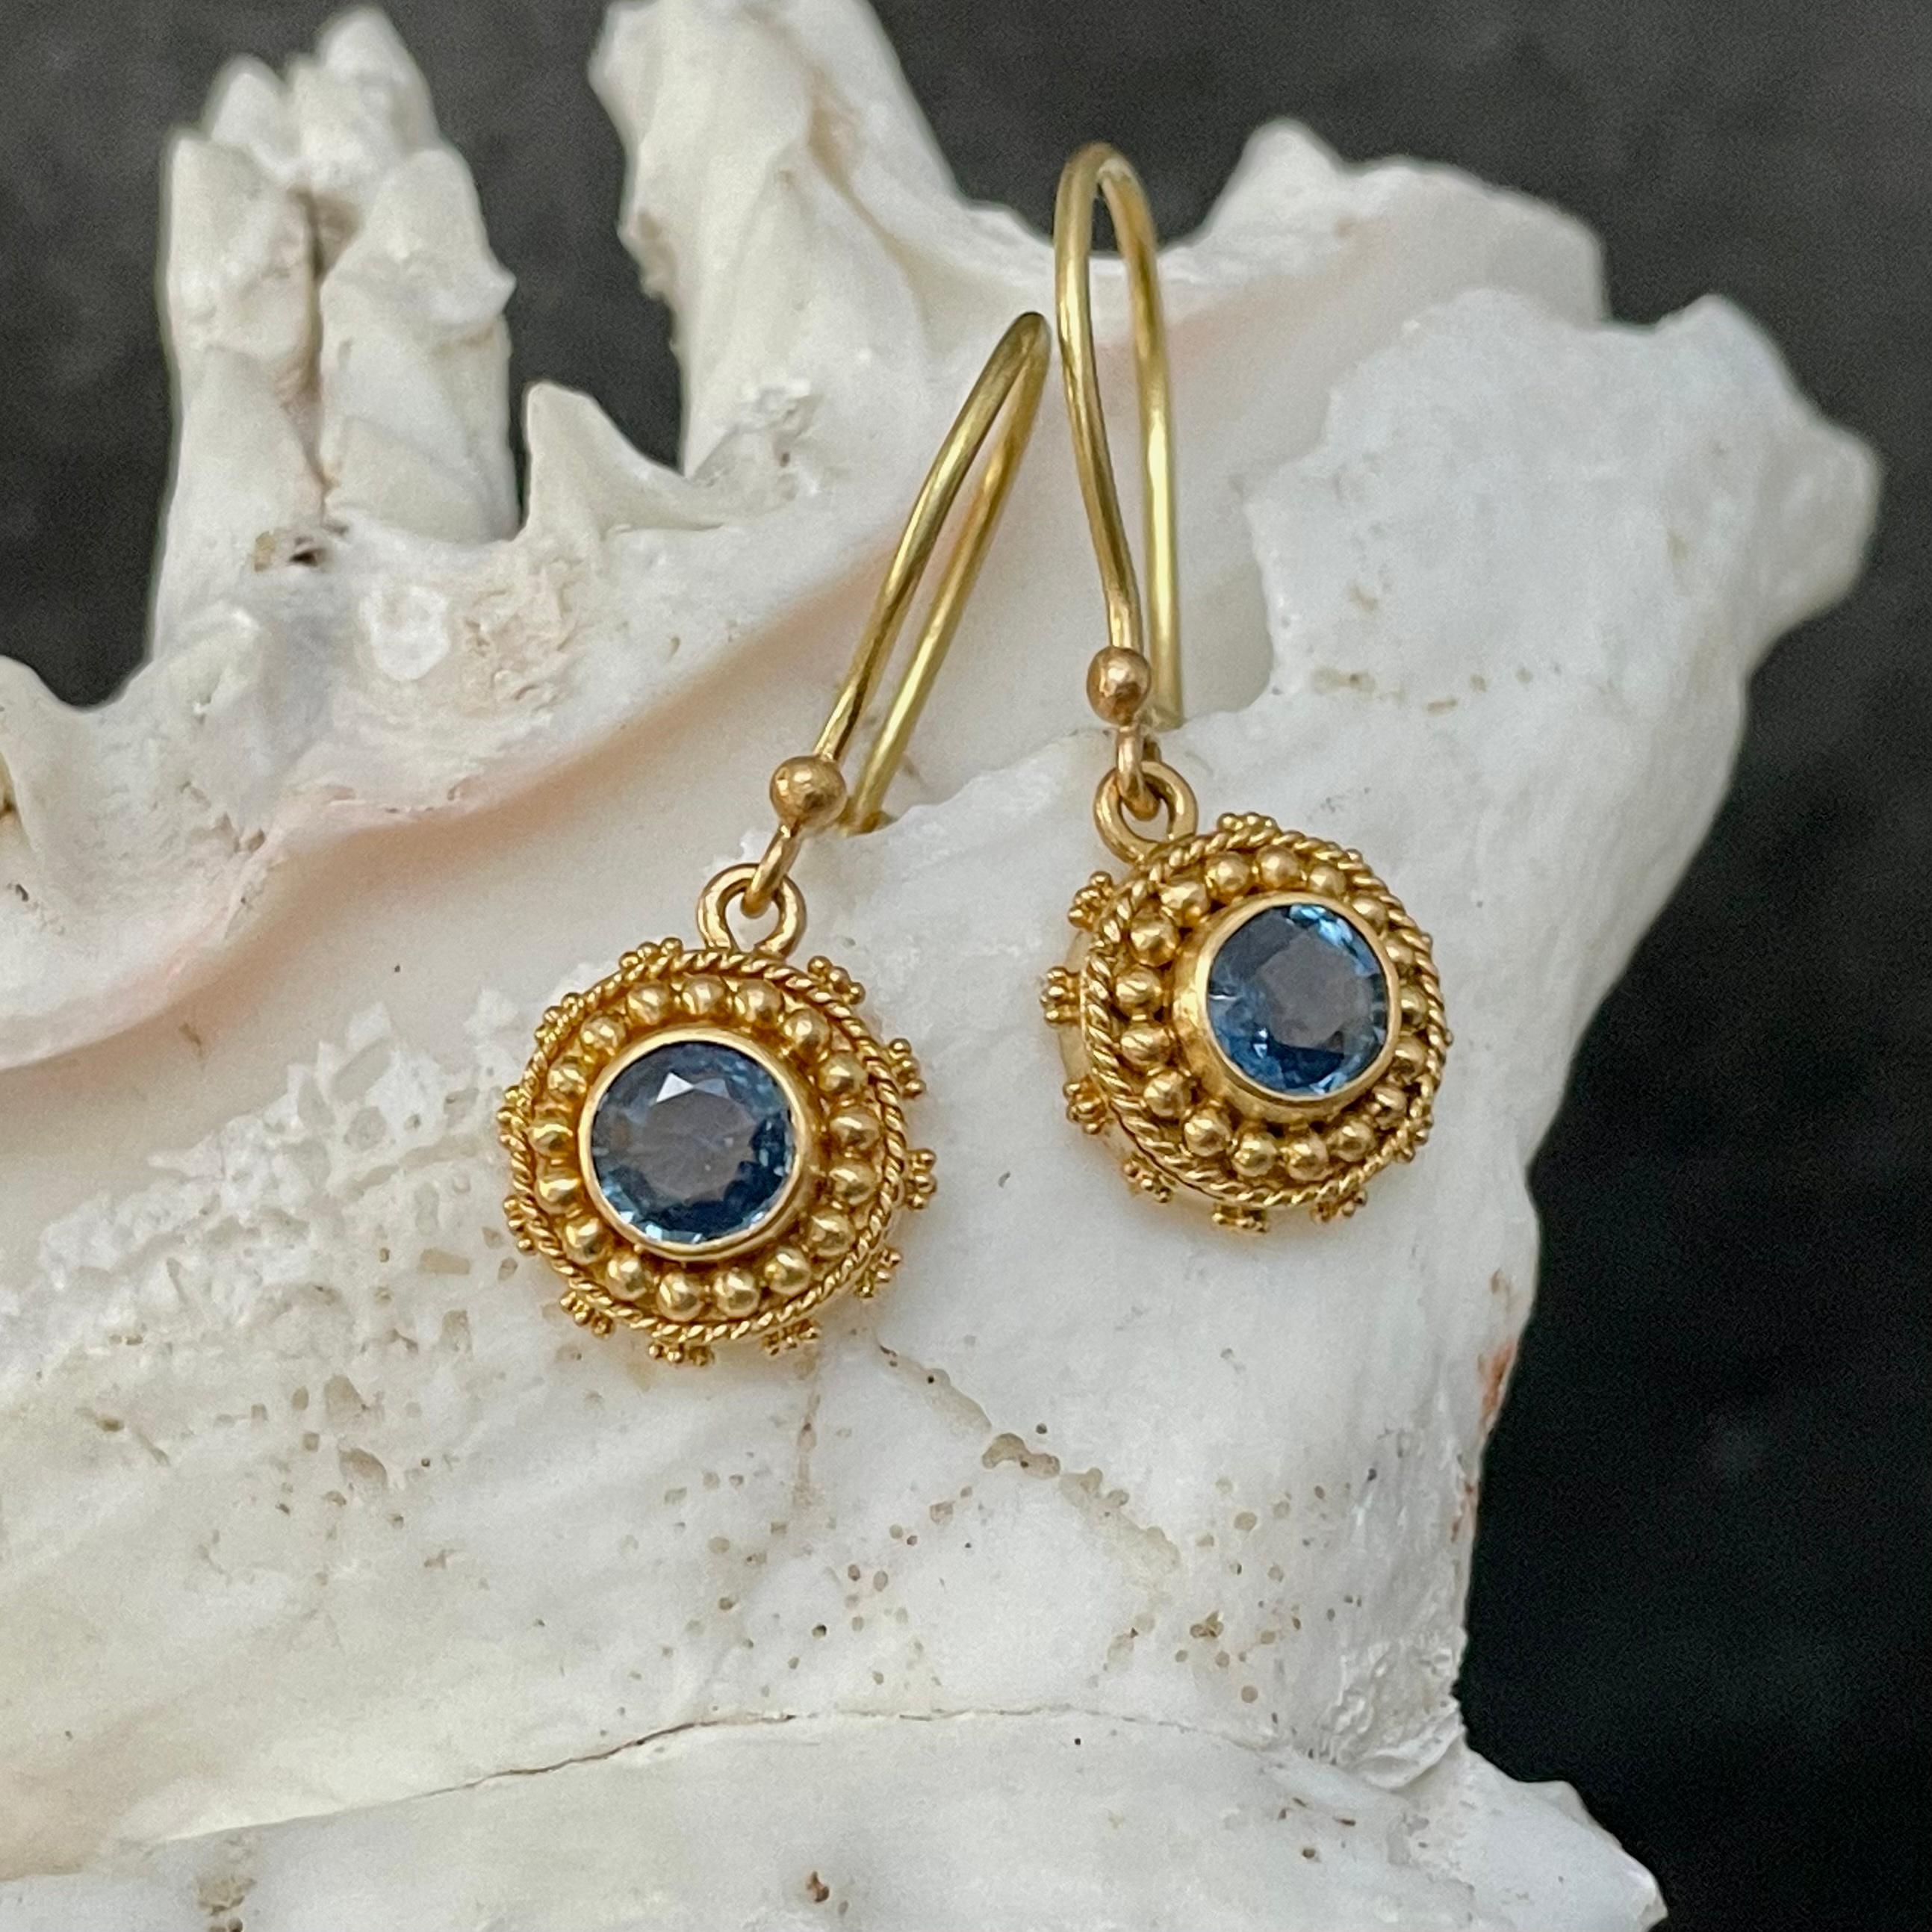 Two 5 mm faceted round blue sapphires are set in delicate handmade high karat granulated settings in this exquisitely classic design.  The radiating circles of gold 